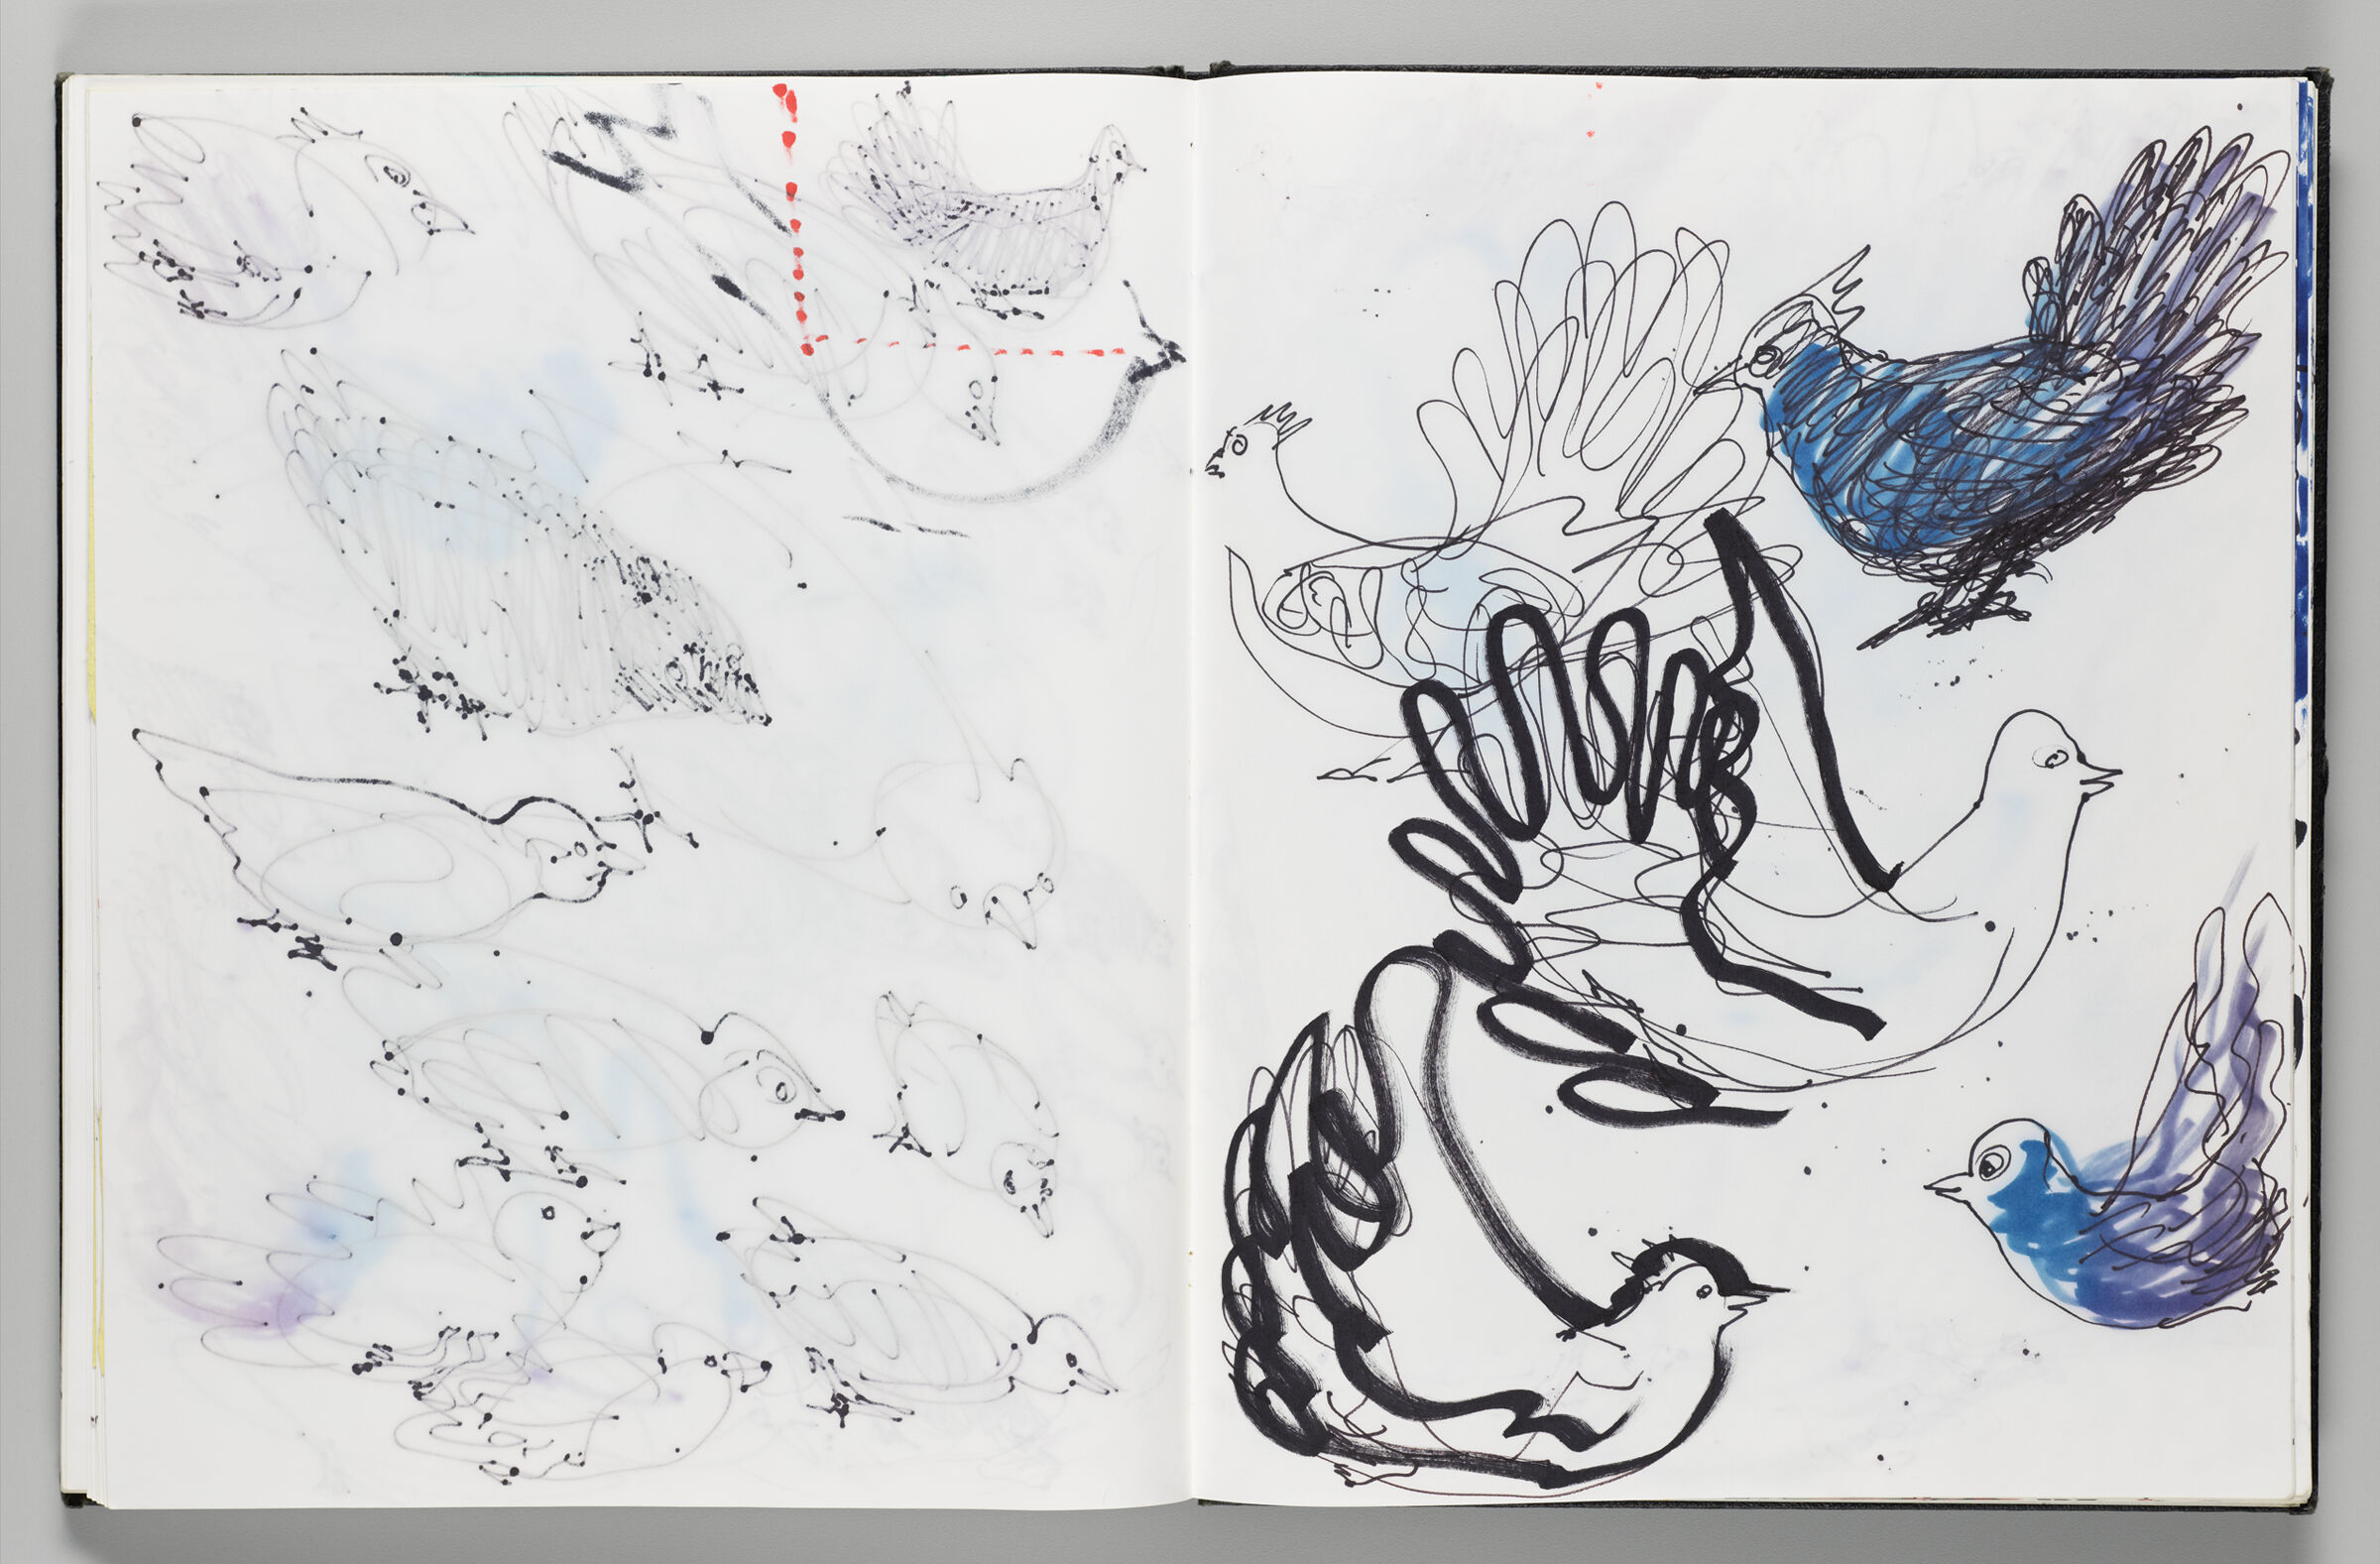 Untitled (Bleed-Through Of Previous Page, Left Page); Untitled (Bird Inflatables With Color Transfer, Right Page)